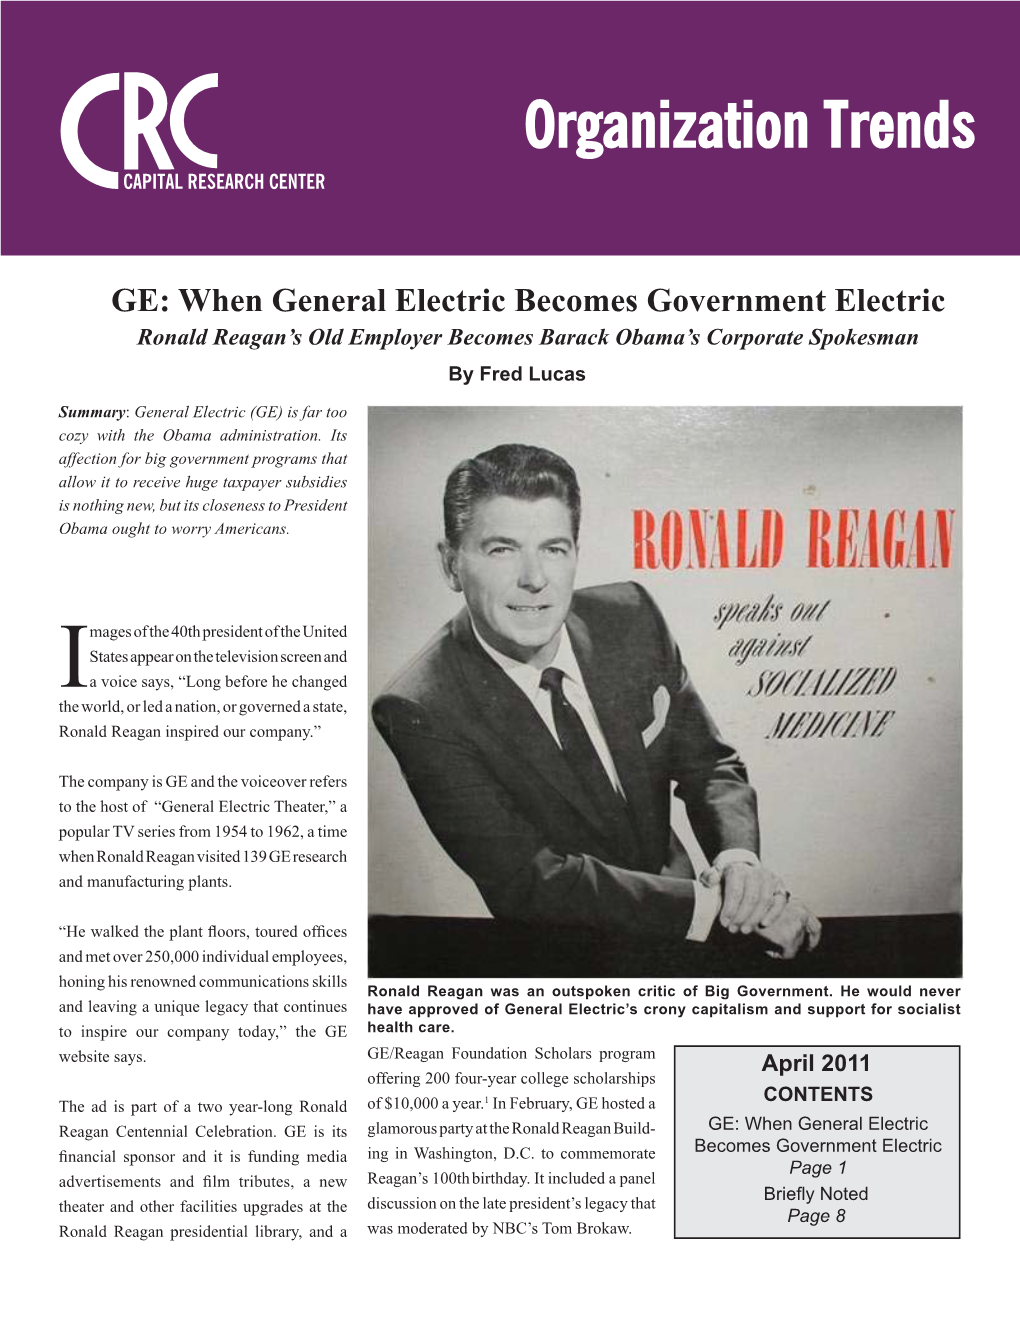 GE: When General Electric Becomes Government Electric Ronald Reagan’S Old Employer Becomes Barack Obama’S Corporate Spokesman by Fred Lucas